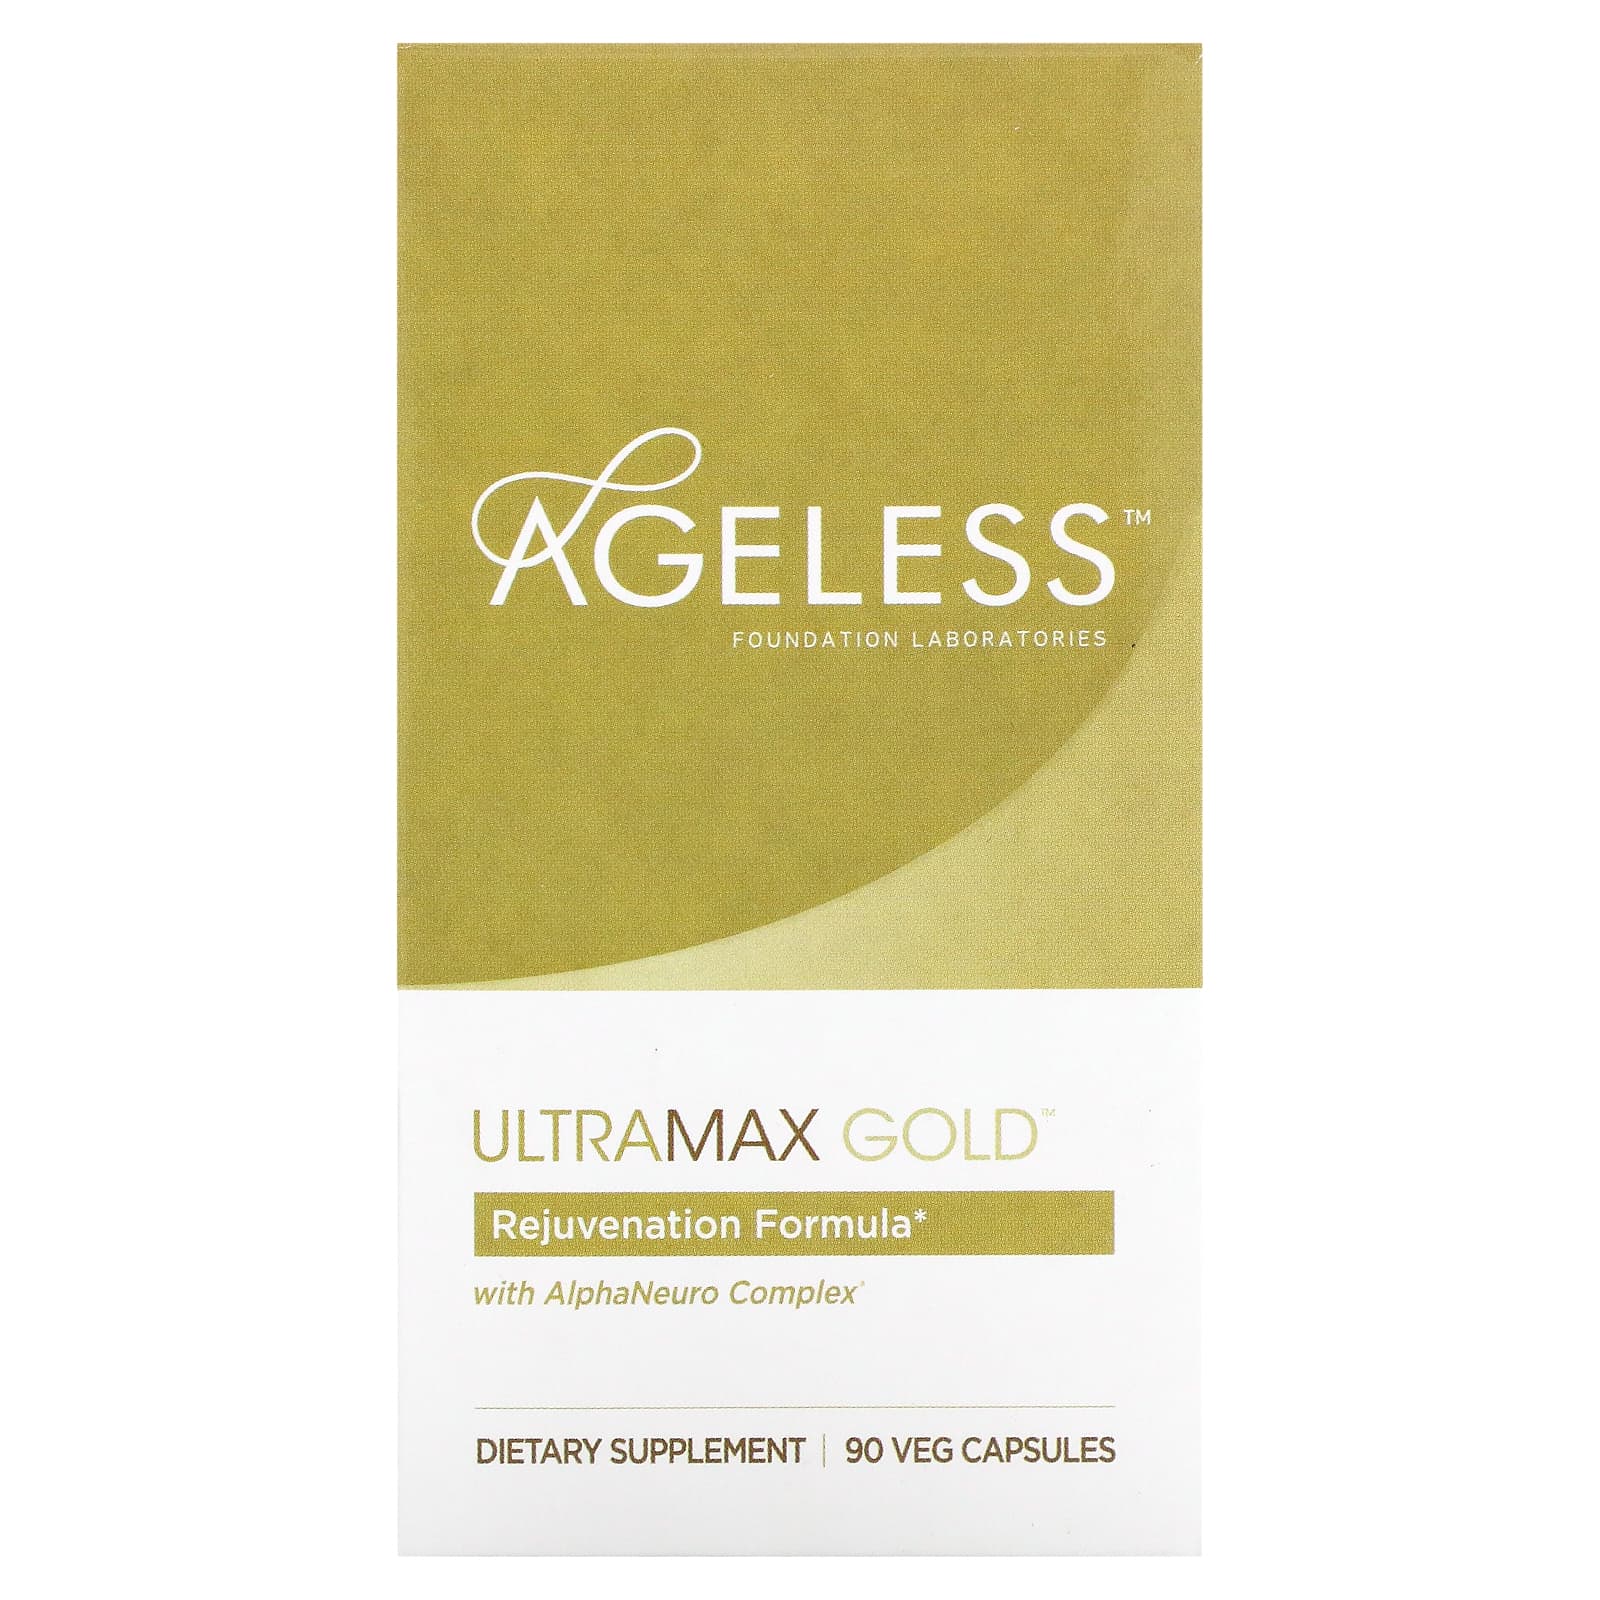 Ageless Foundation Laboratories UltraMax Gold with AlphaNeuro Complex 90 Veg Capsules ageless foundation laboratories ультрадерм голд коллаген стимулятор 60 капсул